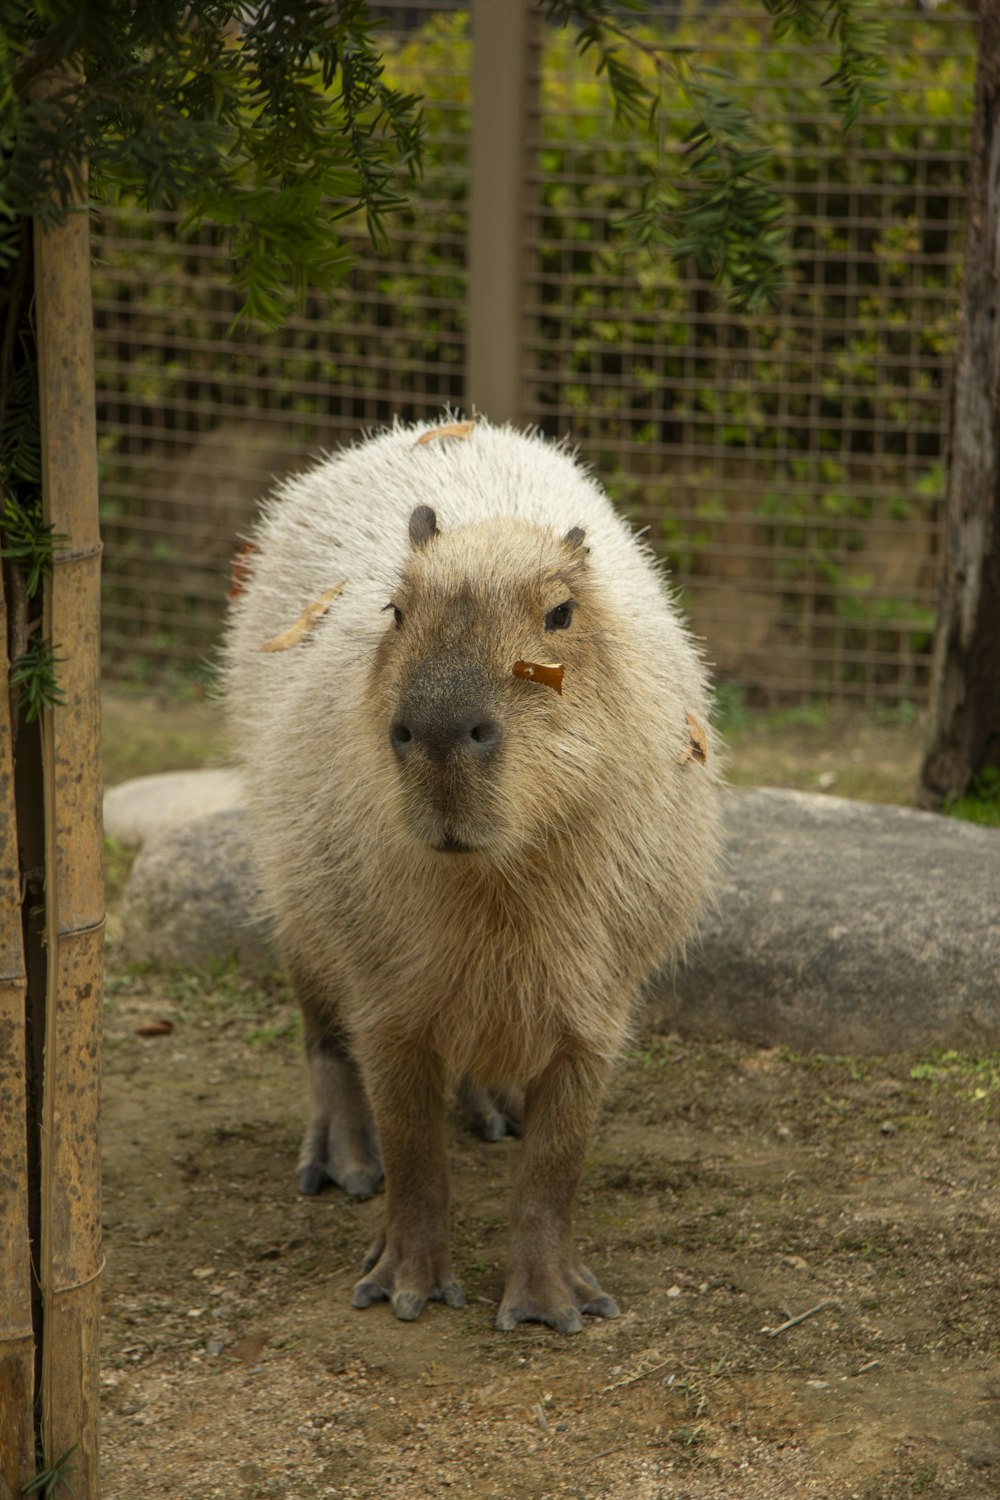 a capybara standing next to a tree in an enclosure